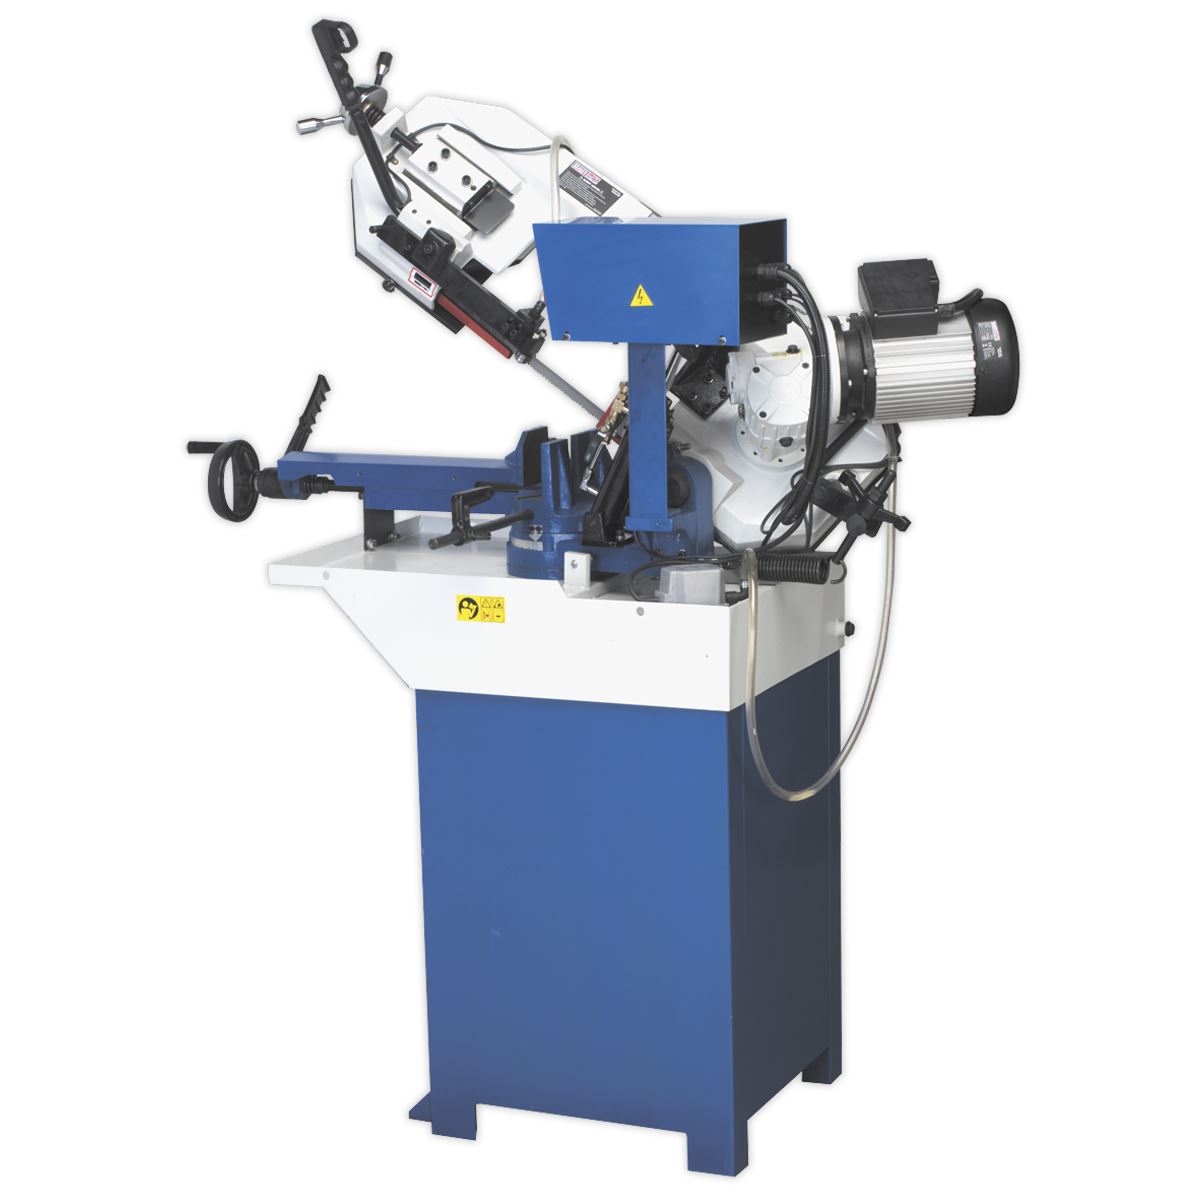 Sealey Industrial Power Bandsaw 210mm SM354CE